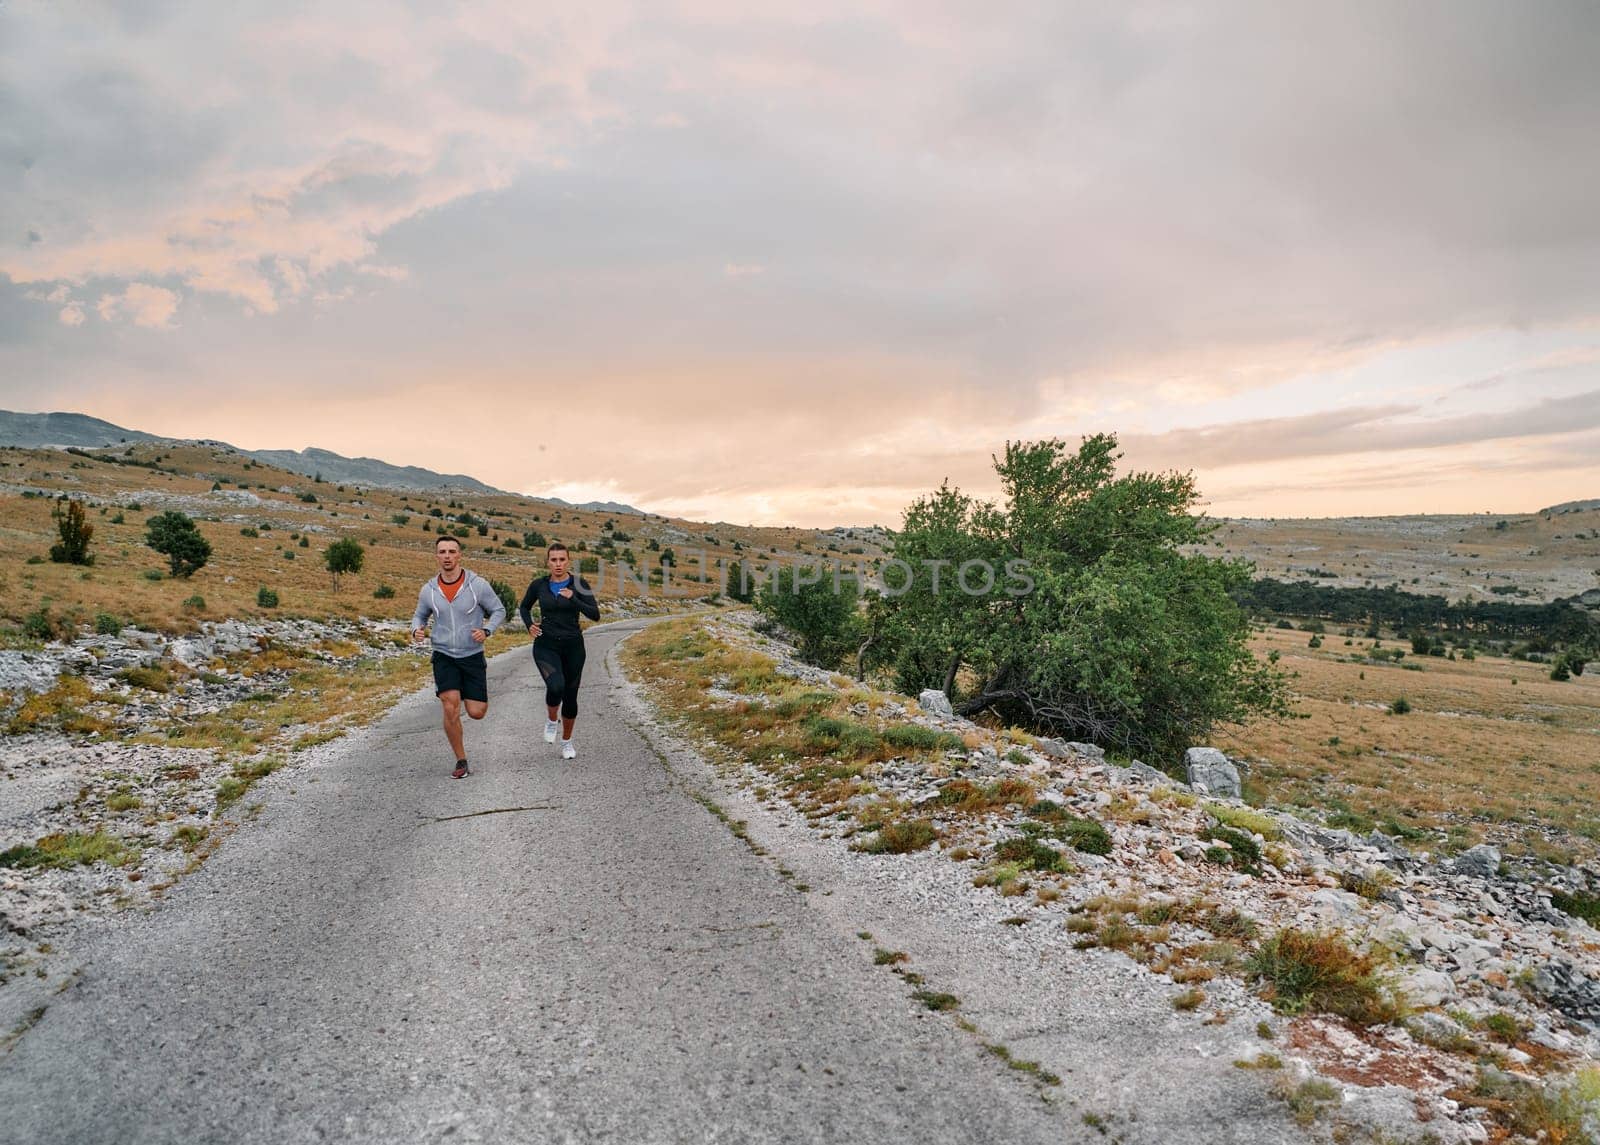 A Couple's Energizing Morning Run in the Mountains by dotshock